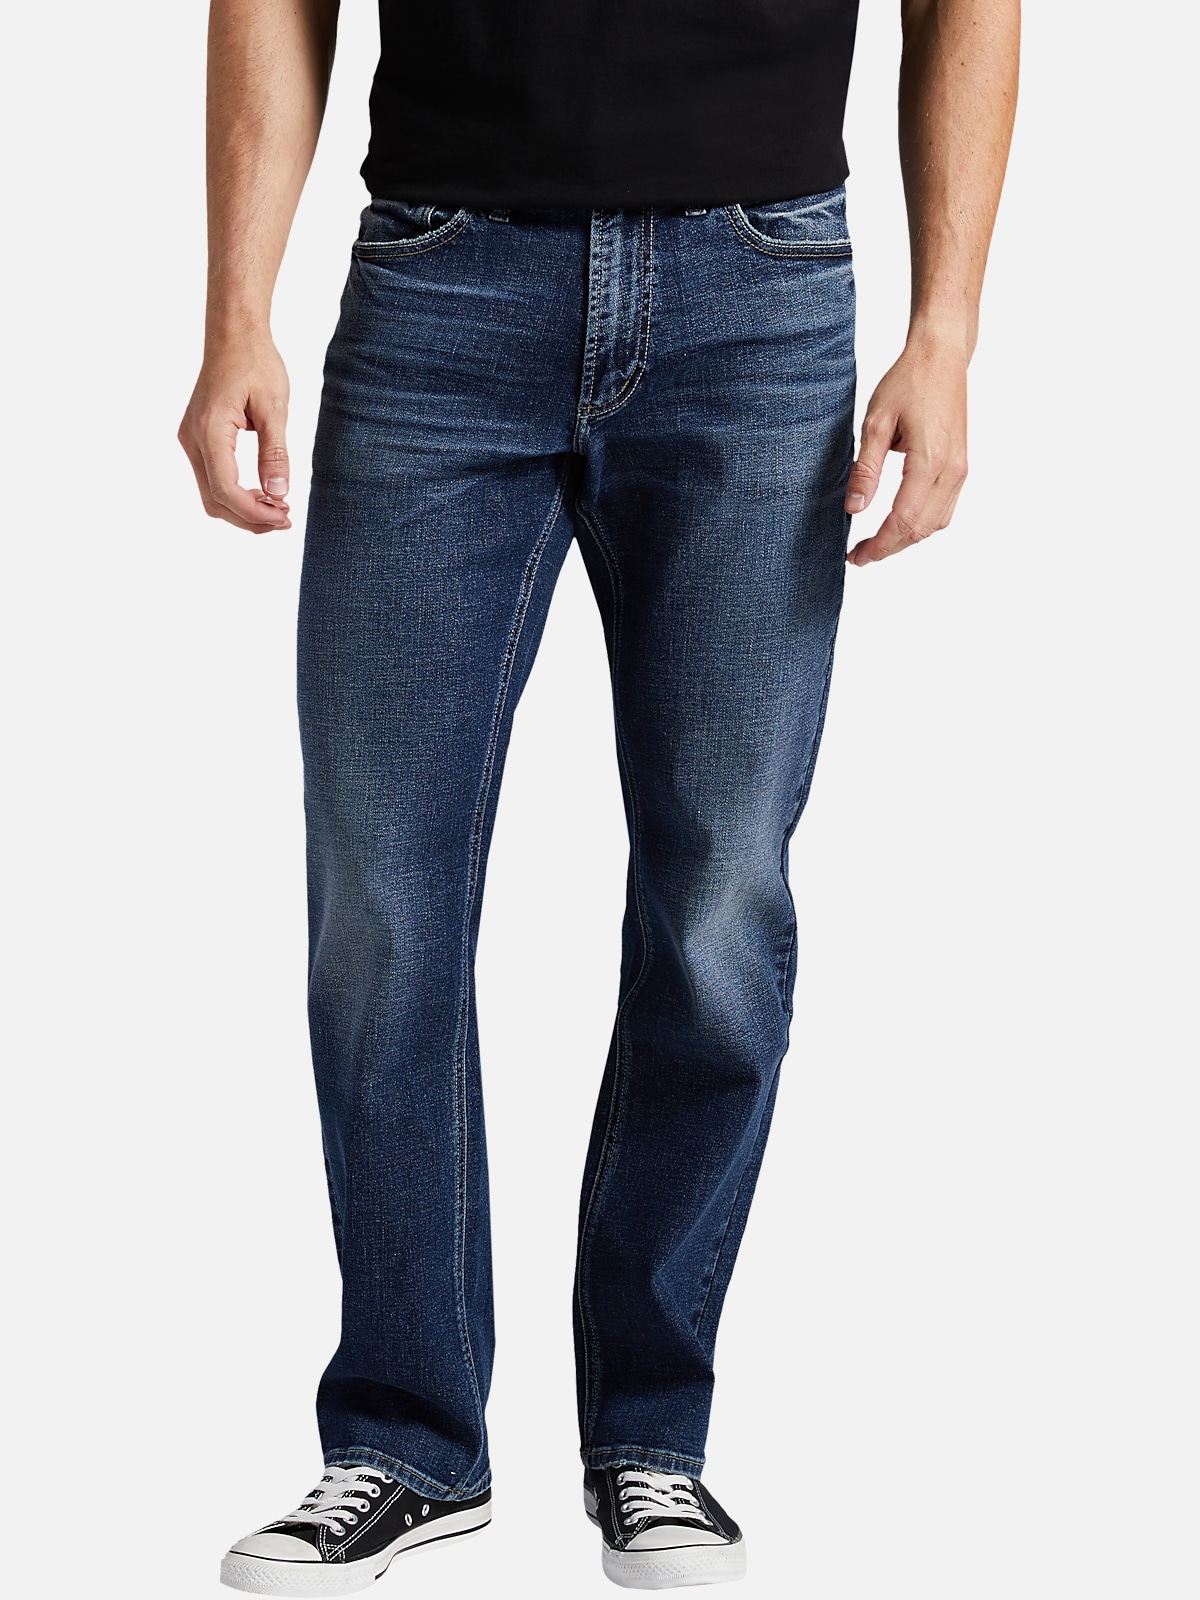 Silver Jeans Grayson Classic Fit Straight Jeans | All Sale| Men's Wearhouse